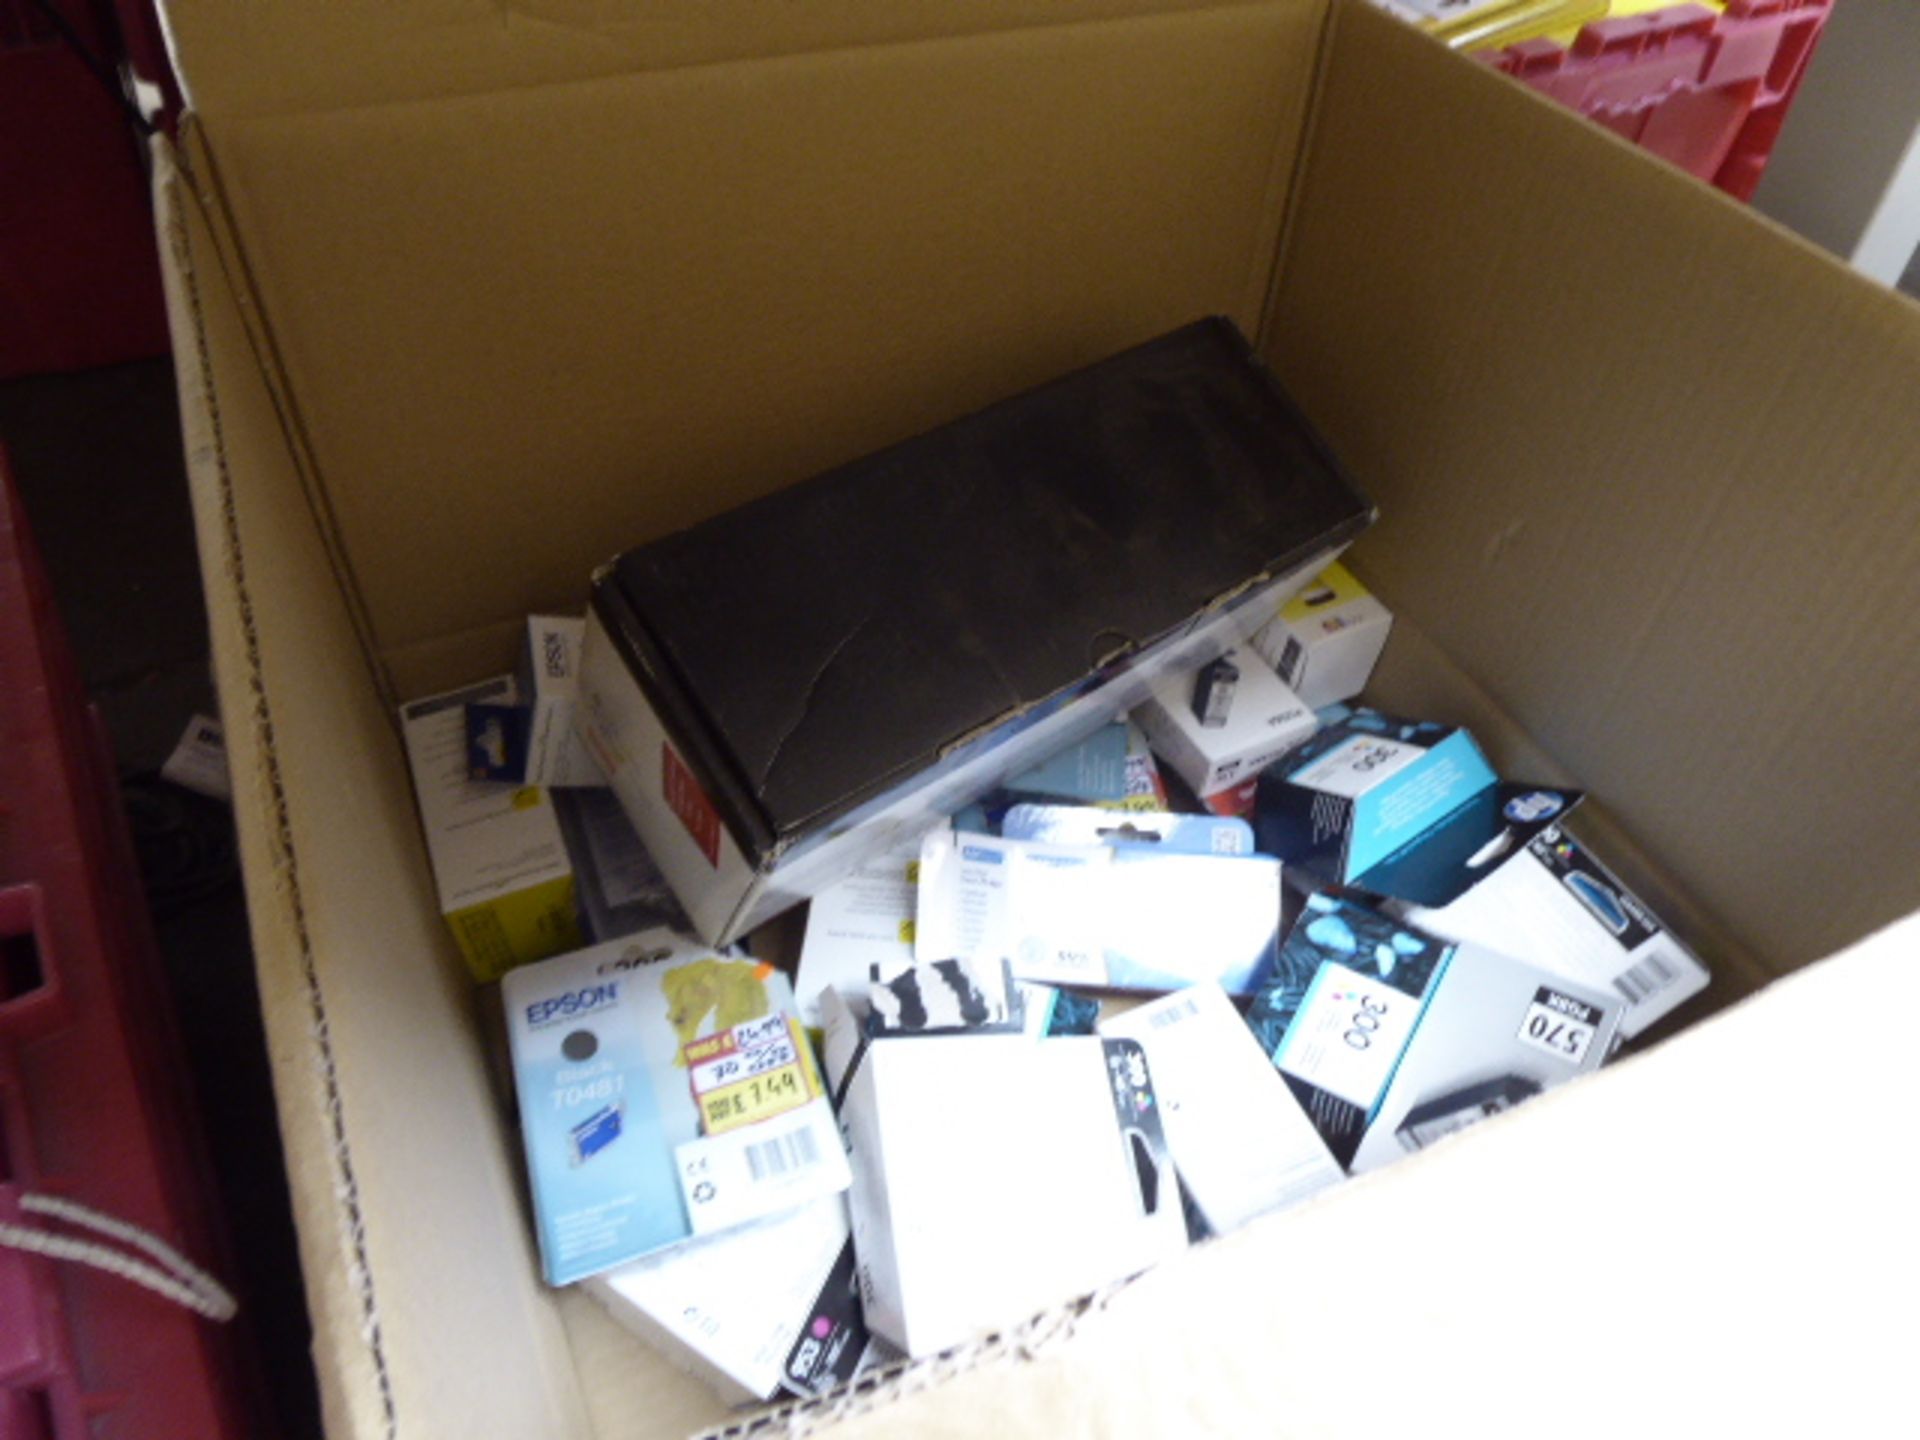 Box of Filofax inserts and loose items of toner, staplers, etc. - Image 2 of 2